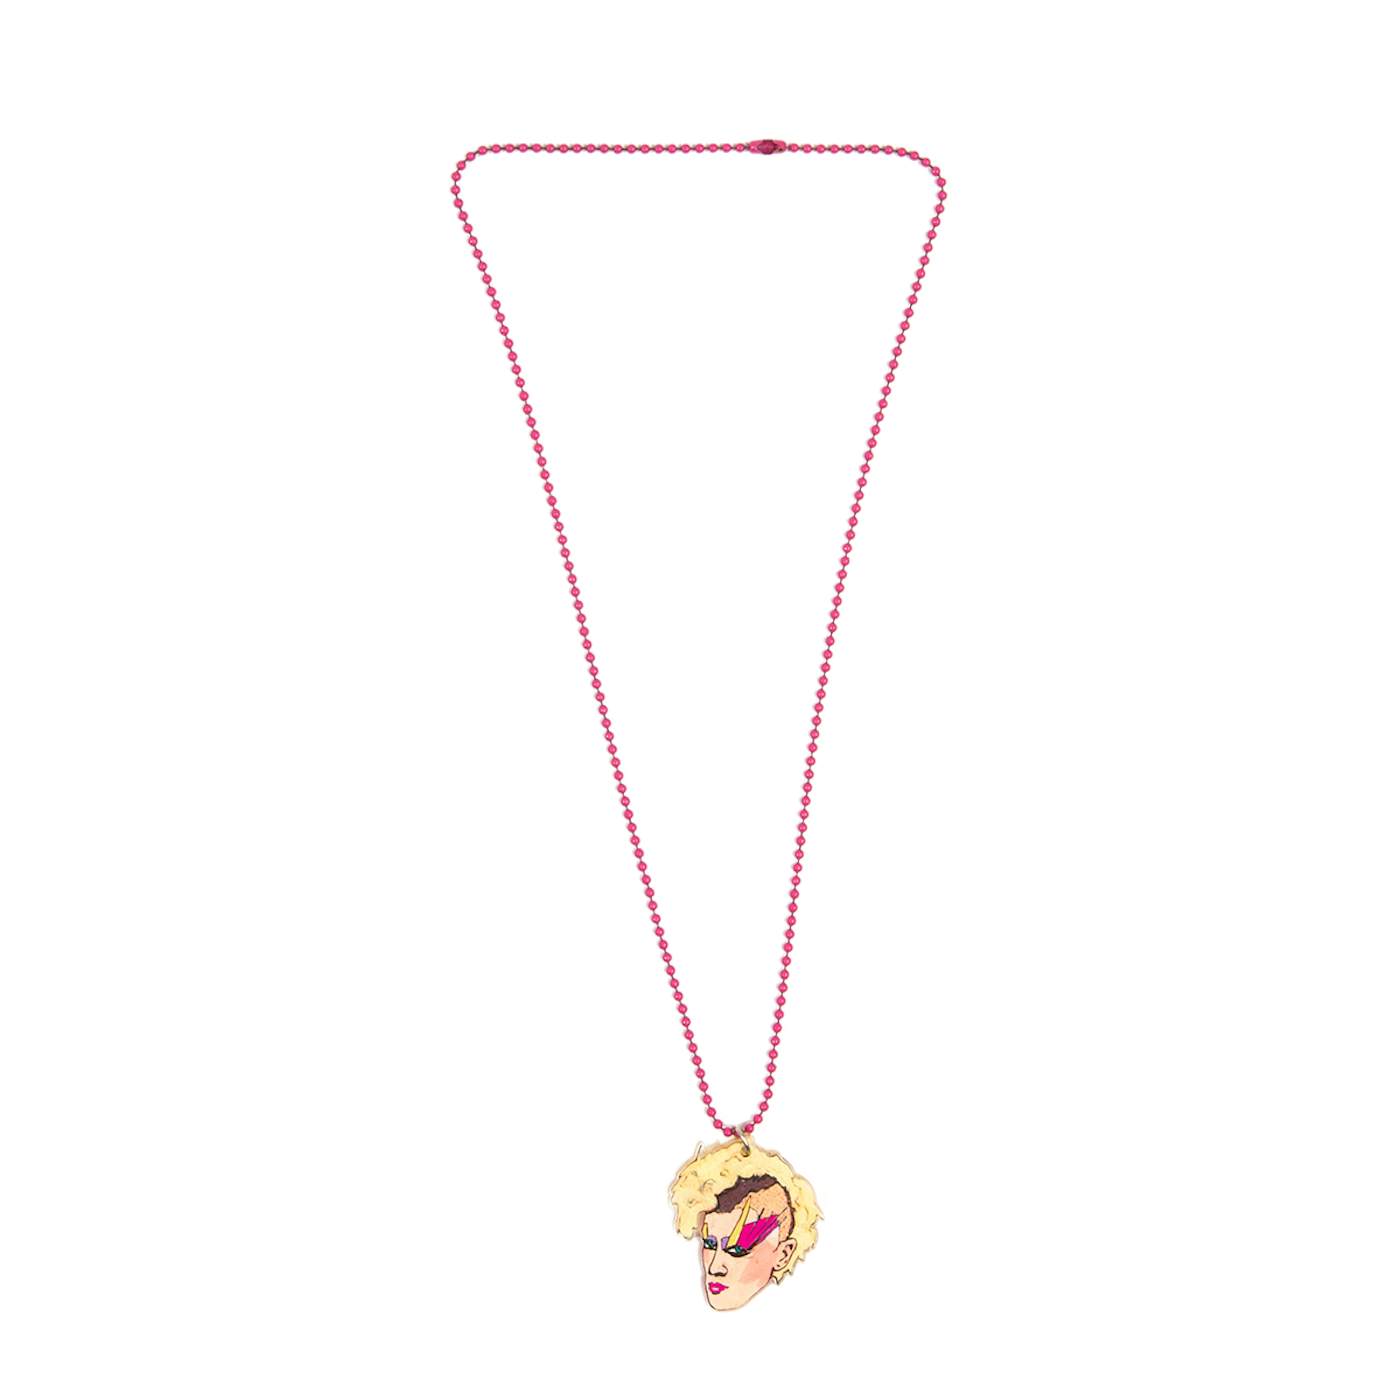 Peaches Acrylic Necklace With Pink Chain By Leroy's Place